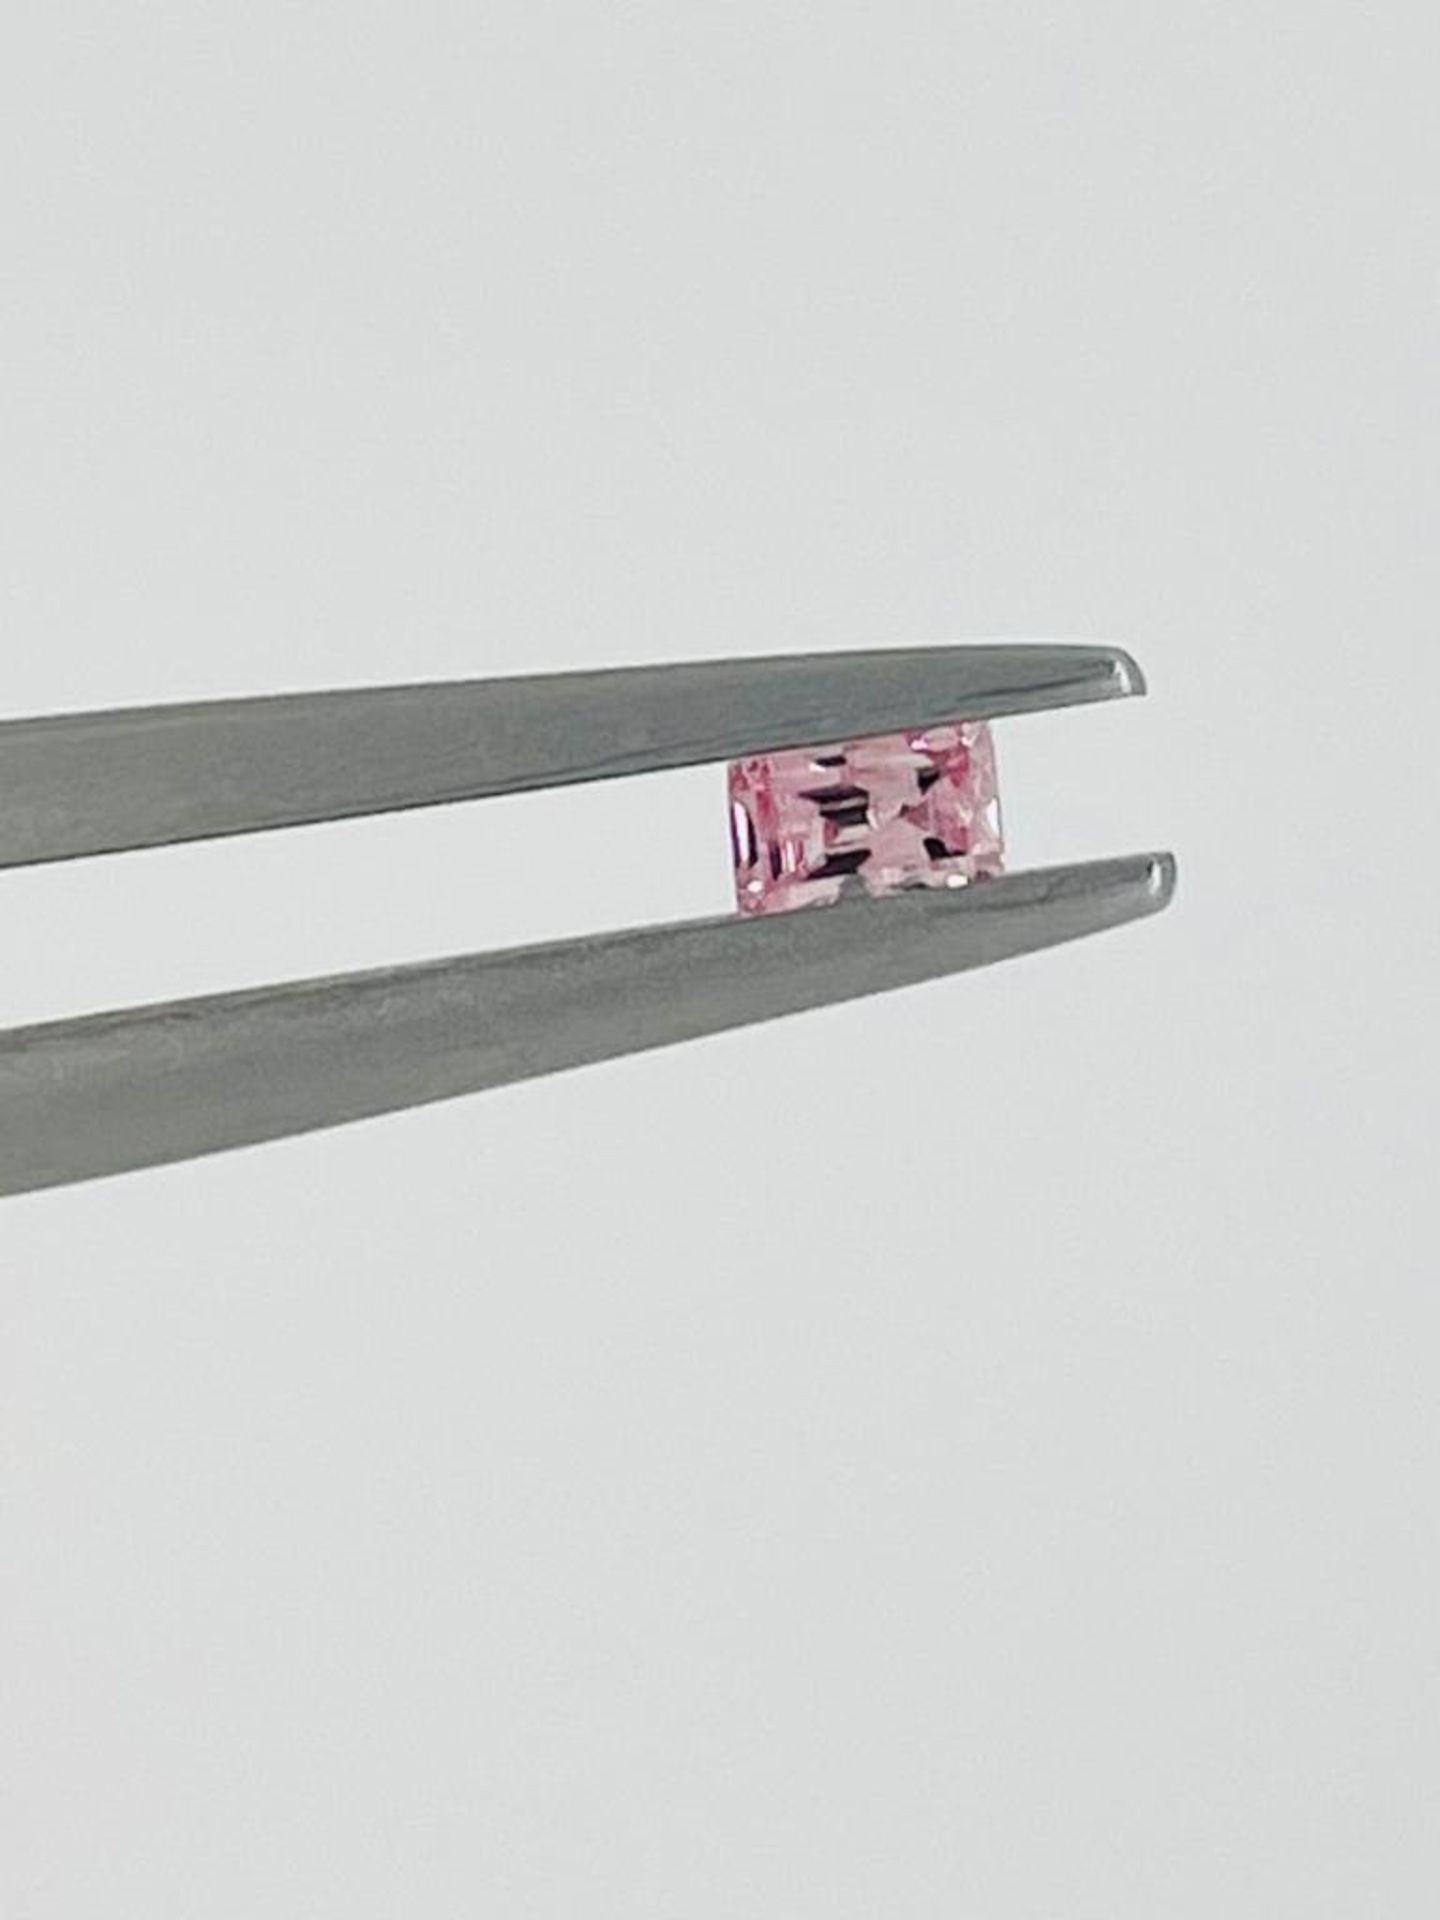 1 DIAMOND 0,08 CT NATURAL FANCY PINK , EVEN SHAPE - CERTIFICATION GIA - AM20705-21 - Image 3 of 4